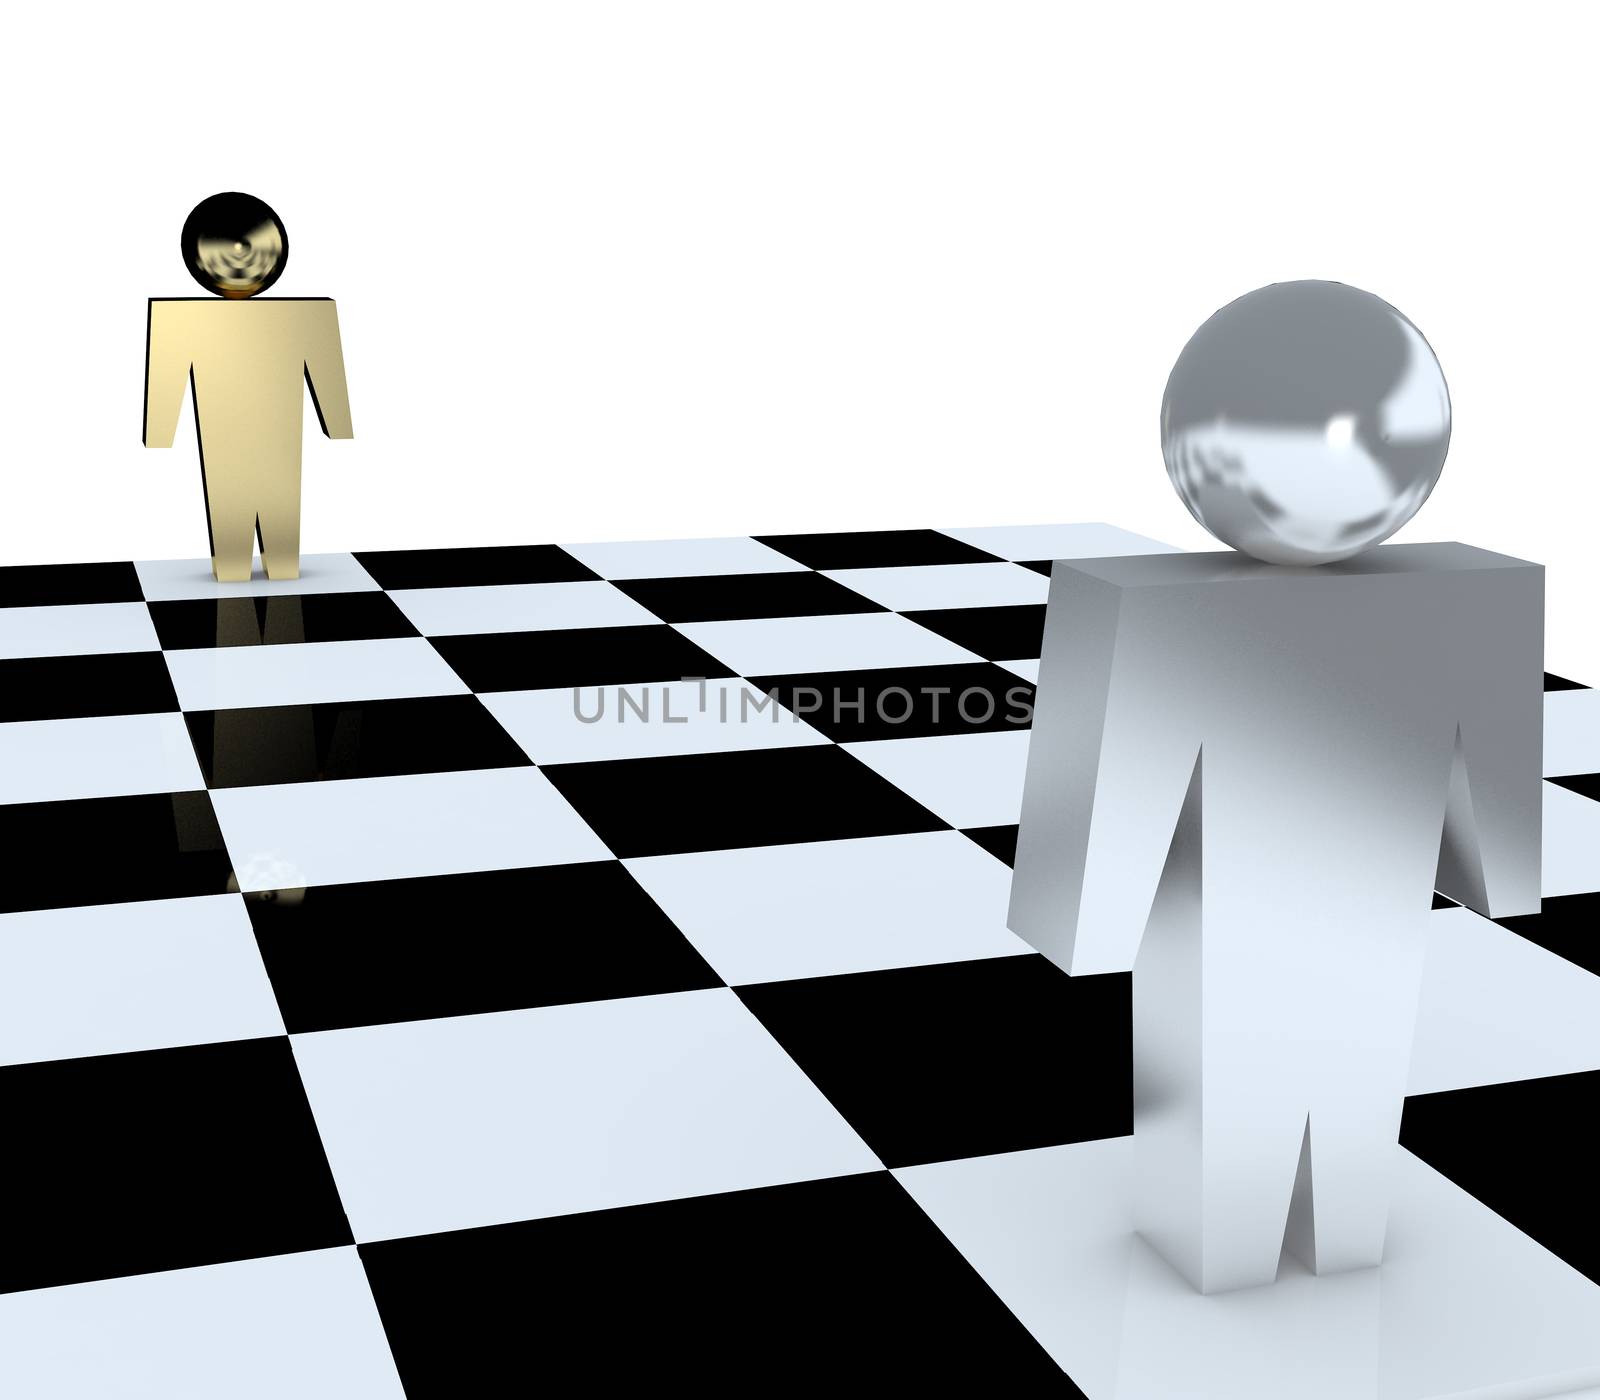  People in game chess board for concept business abstract